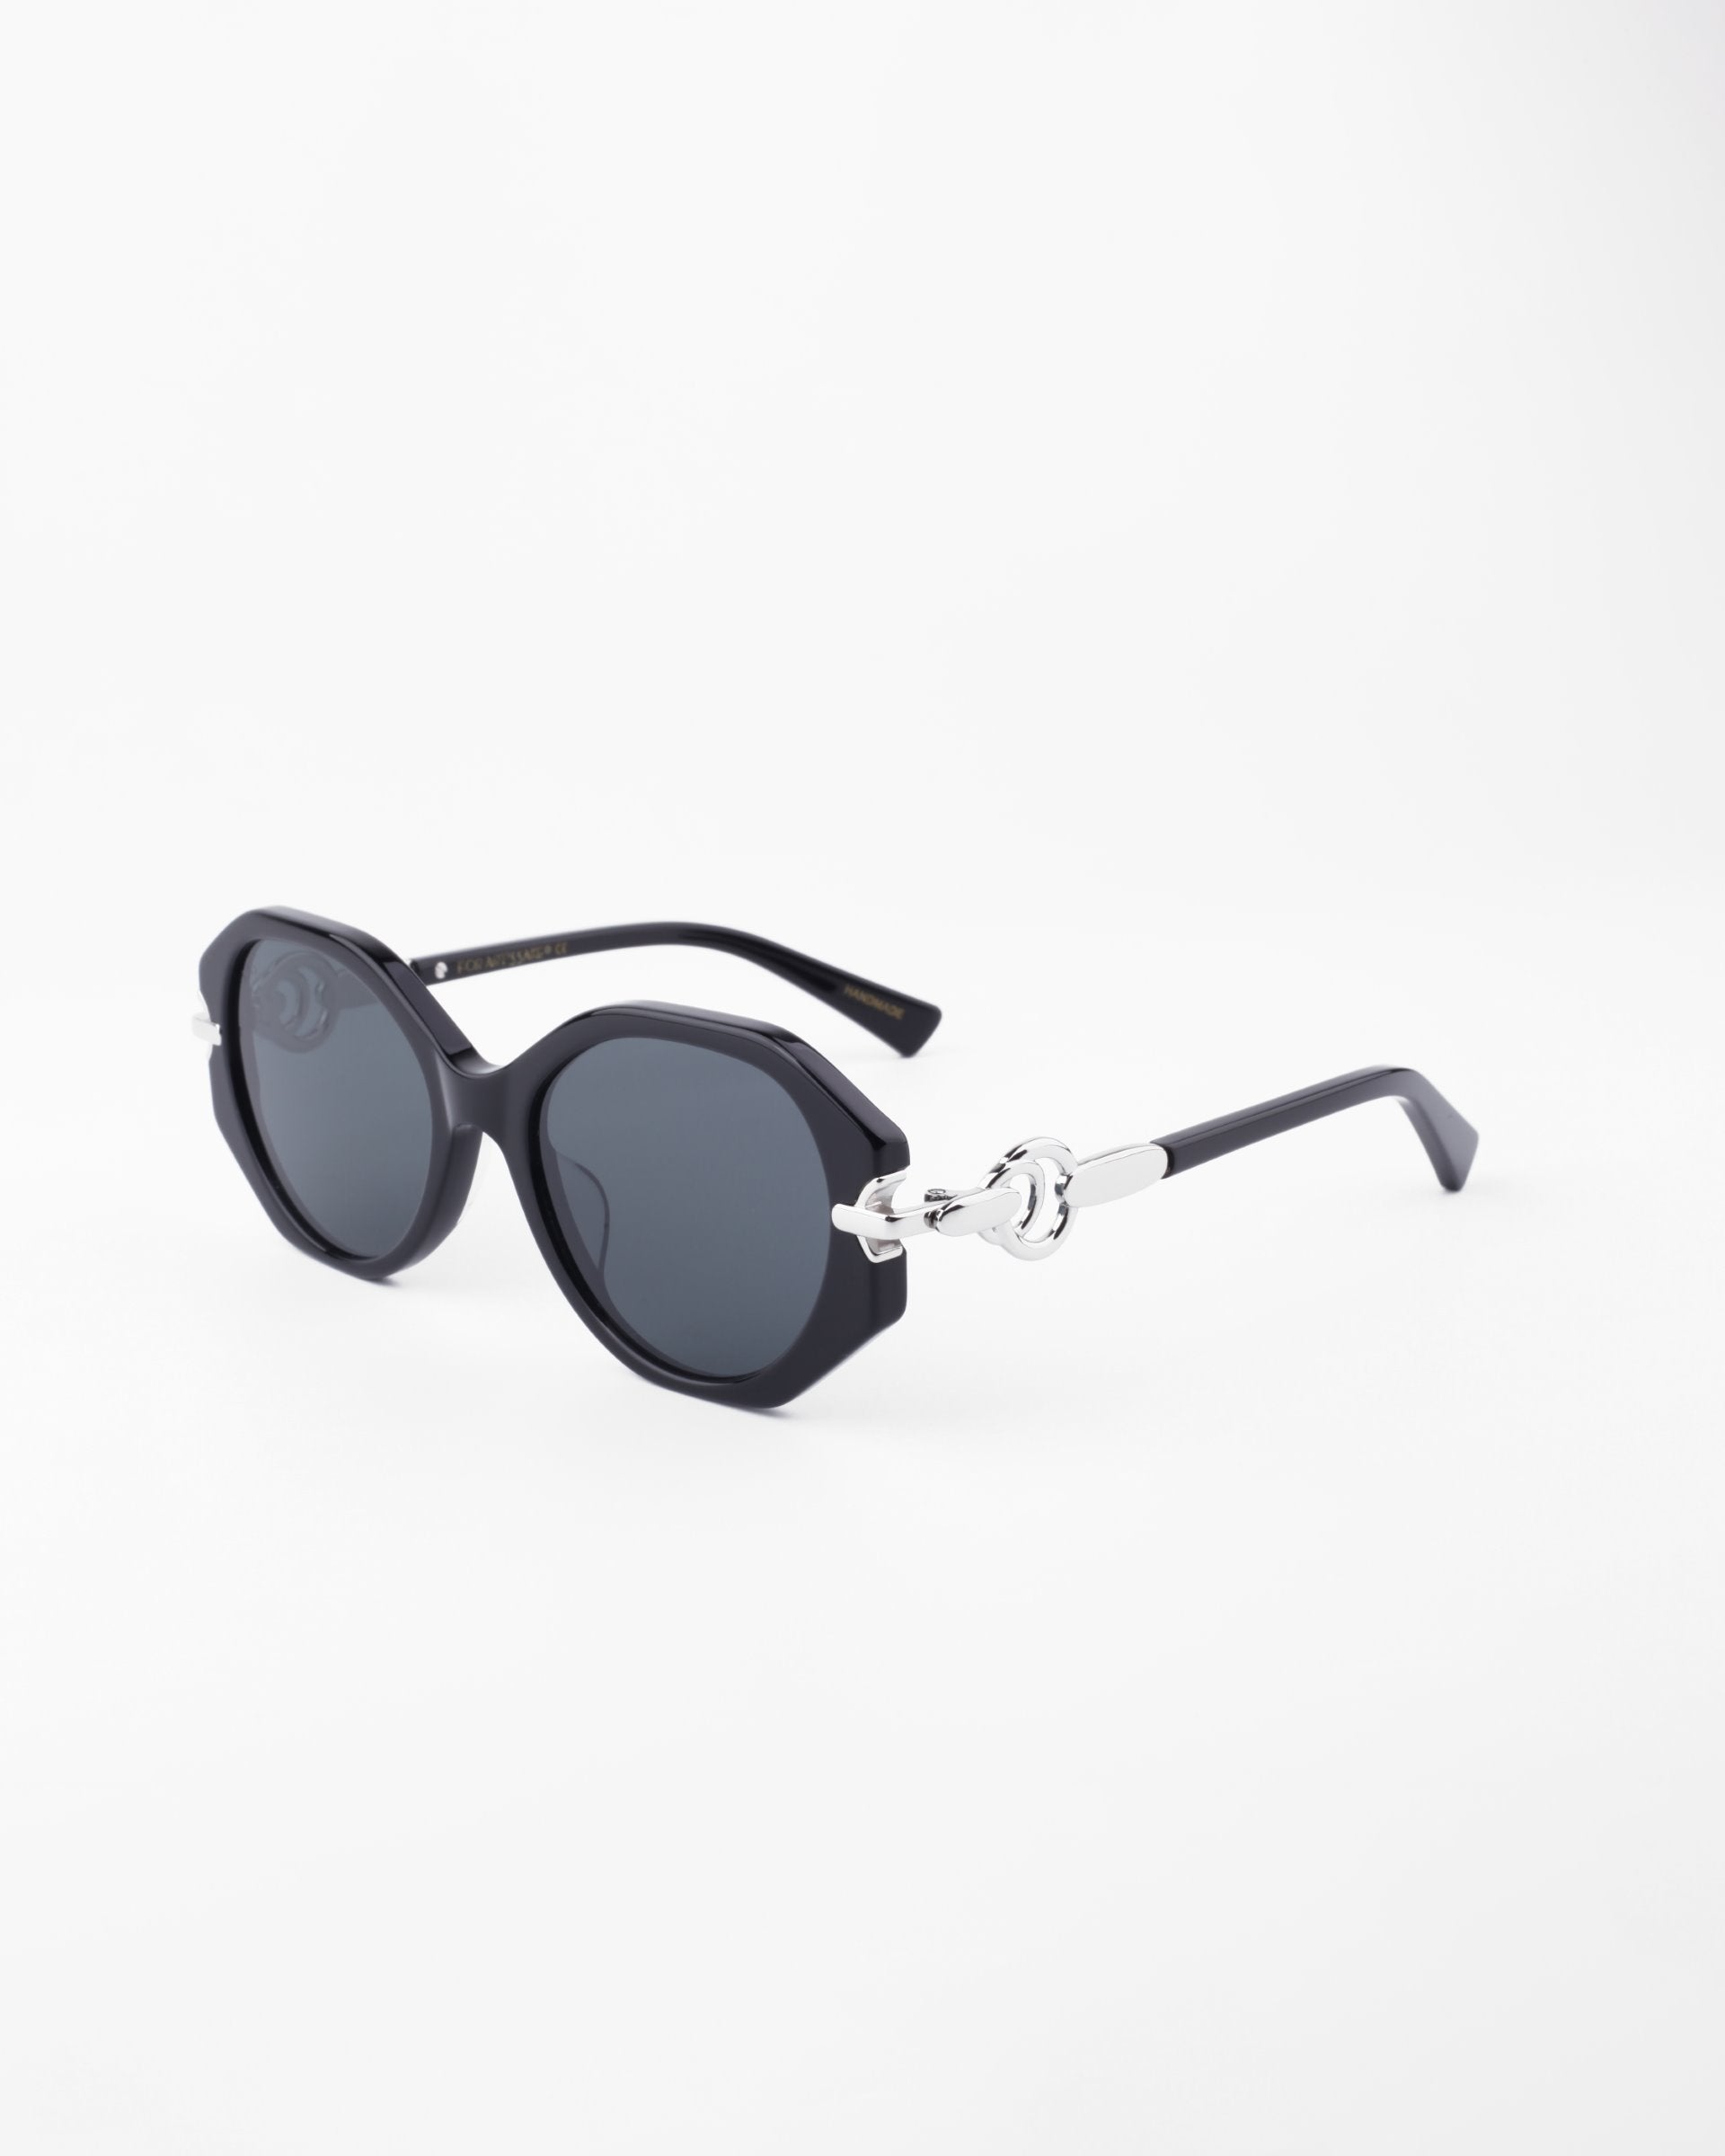 A pair of stylish black Seaside sunglasses from For Art's Sake® featuring octagonal, shatter-resistant lenses and silver accents on the hinges and arms. The design, with its modern, slightly thick rims and handmade acetate frame, exudes a fashionable and chic appearance. The background is a plain, light color.